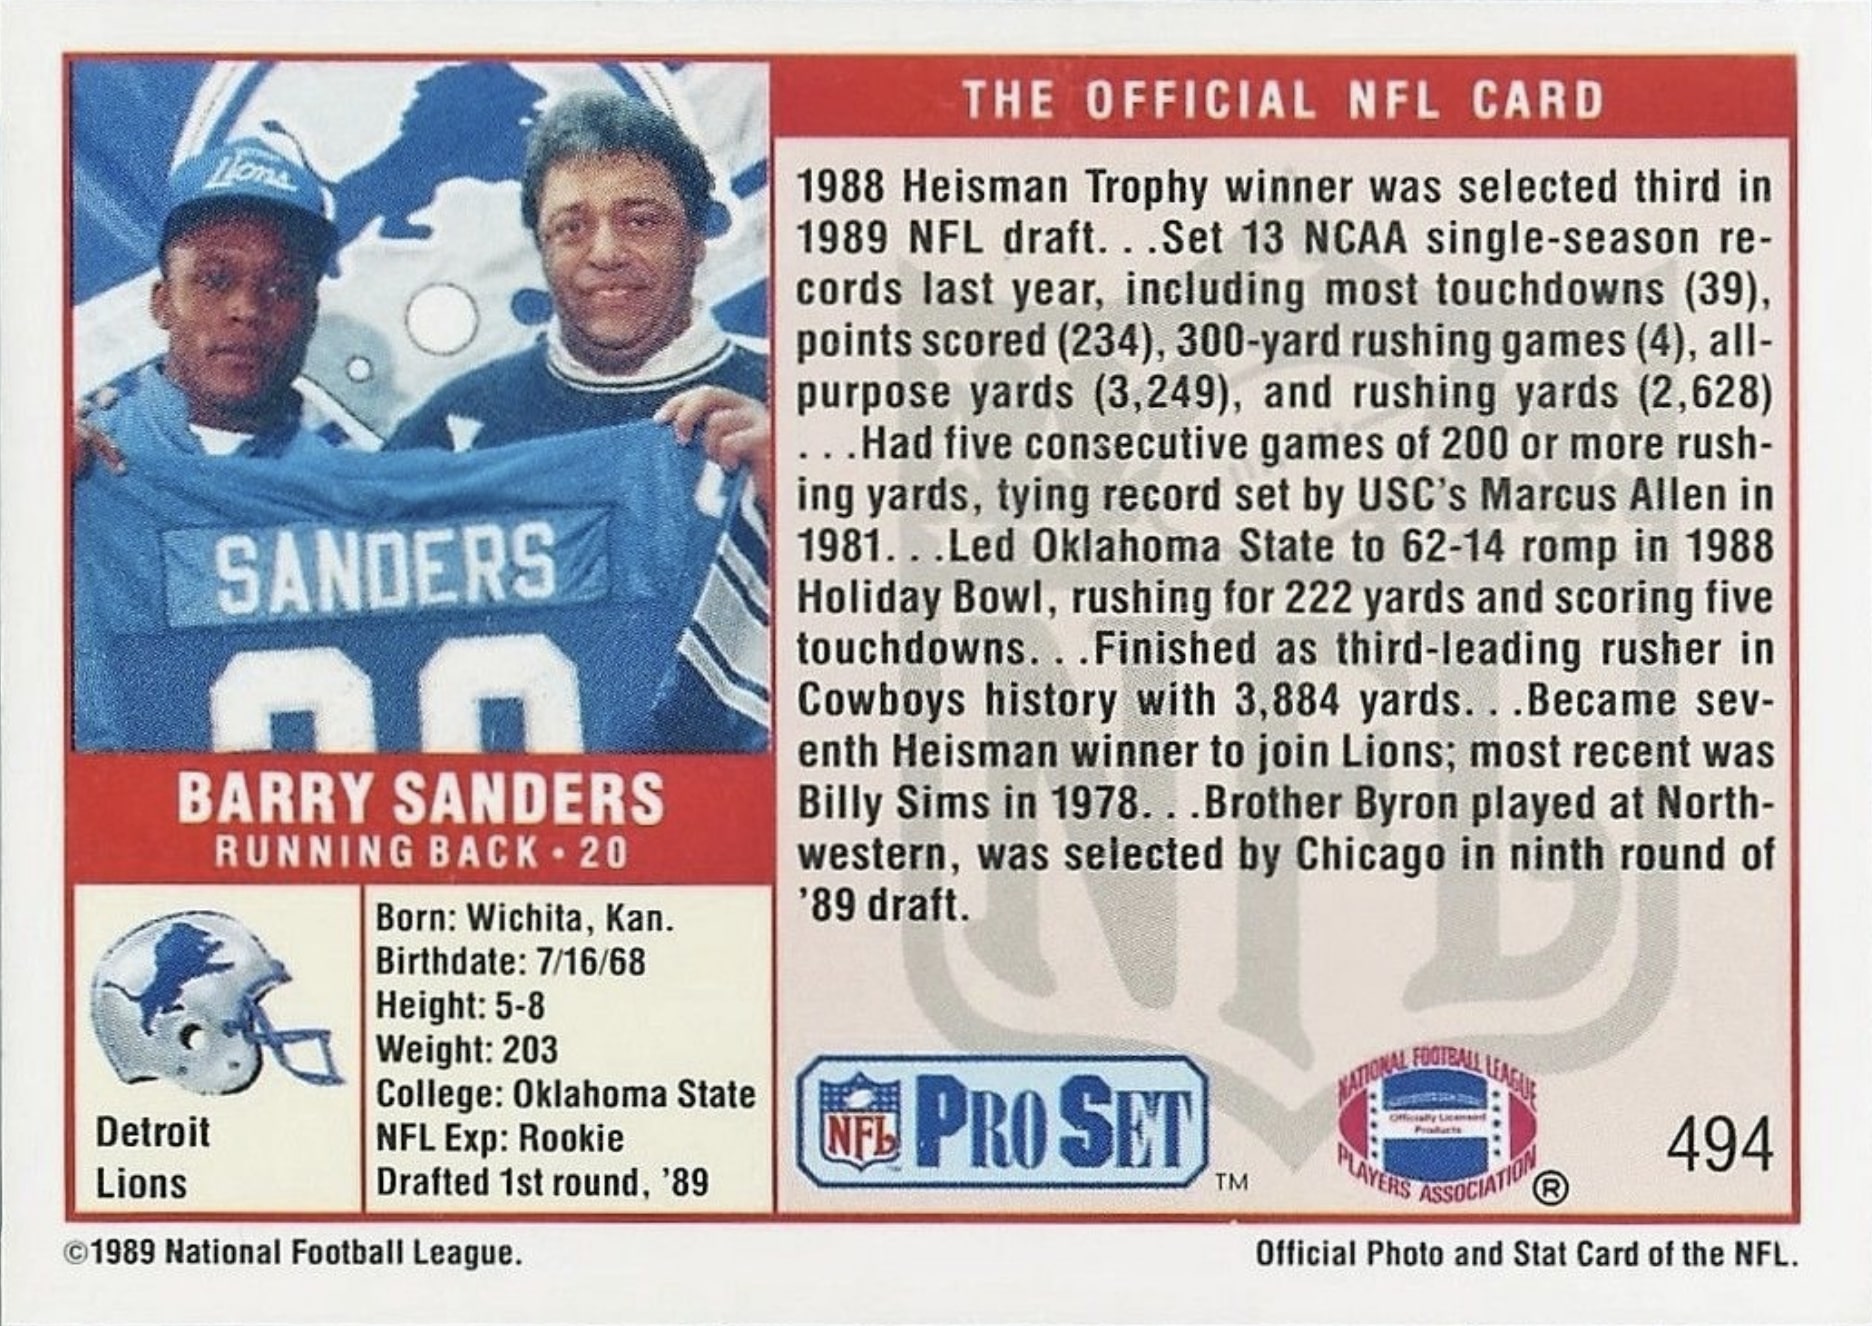 Barry Sanders Rookie Cards The Ultimate Collector S Guide Old Sports Cards